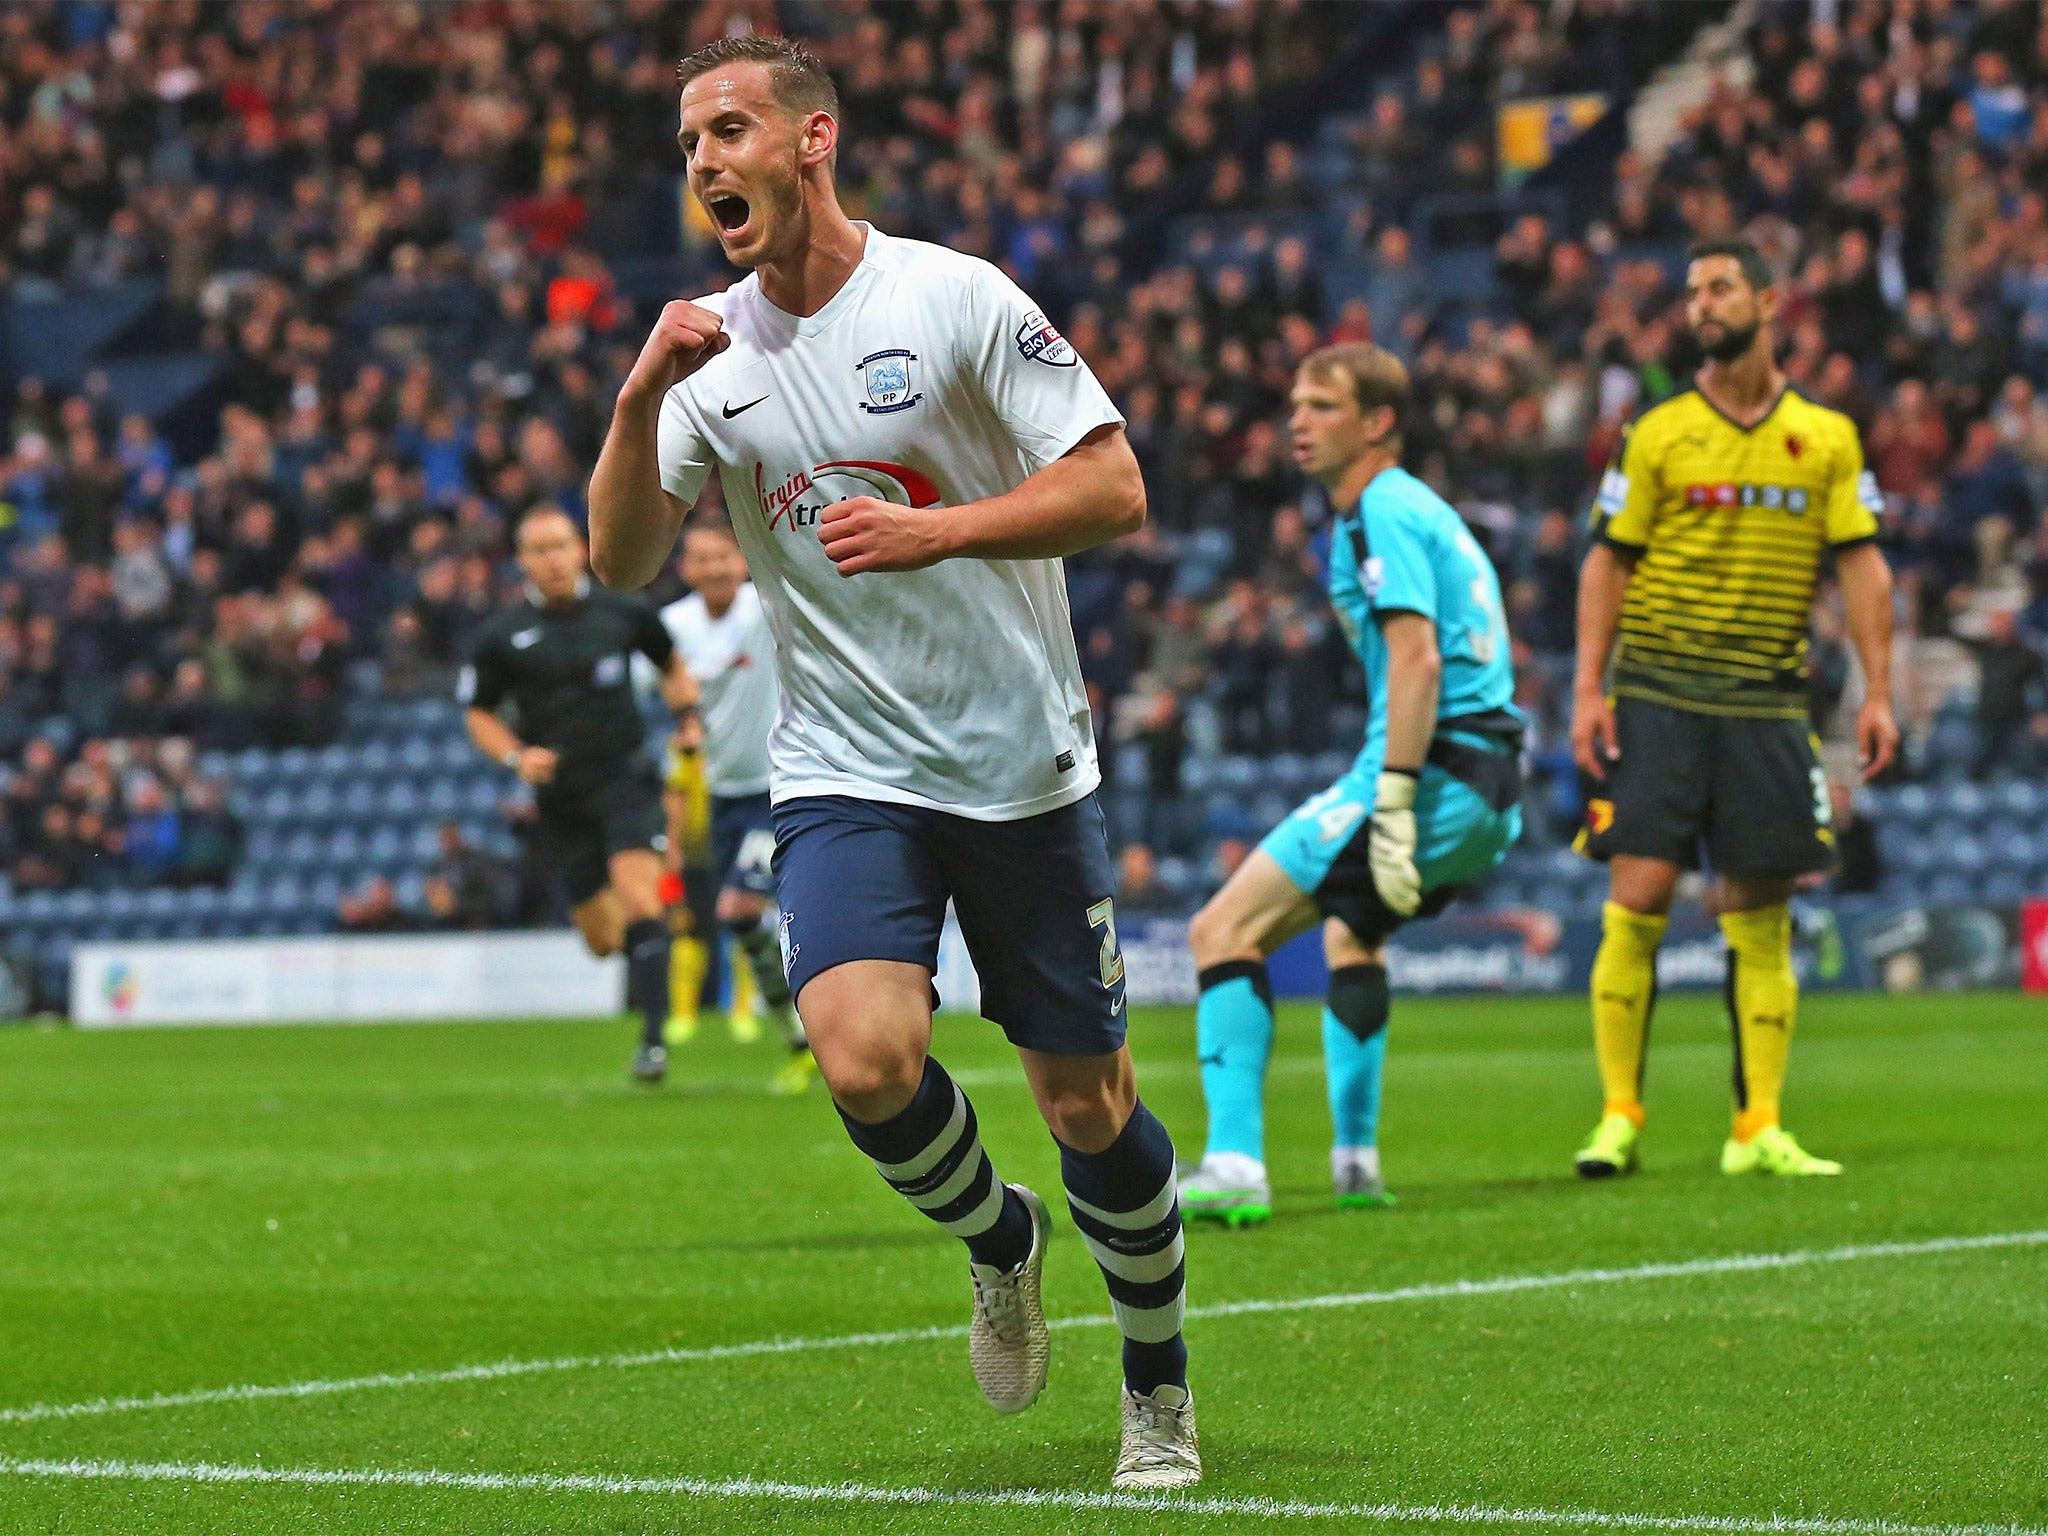 A seventh-minute goal from Marnick Vermijl earned Preston victory over Premier League Watford